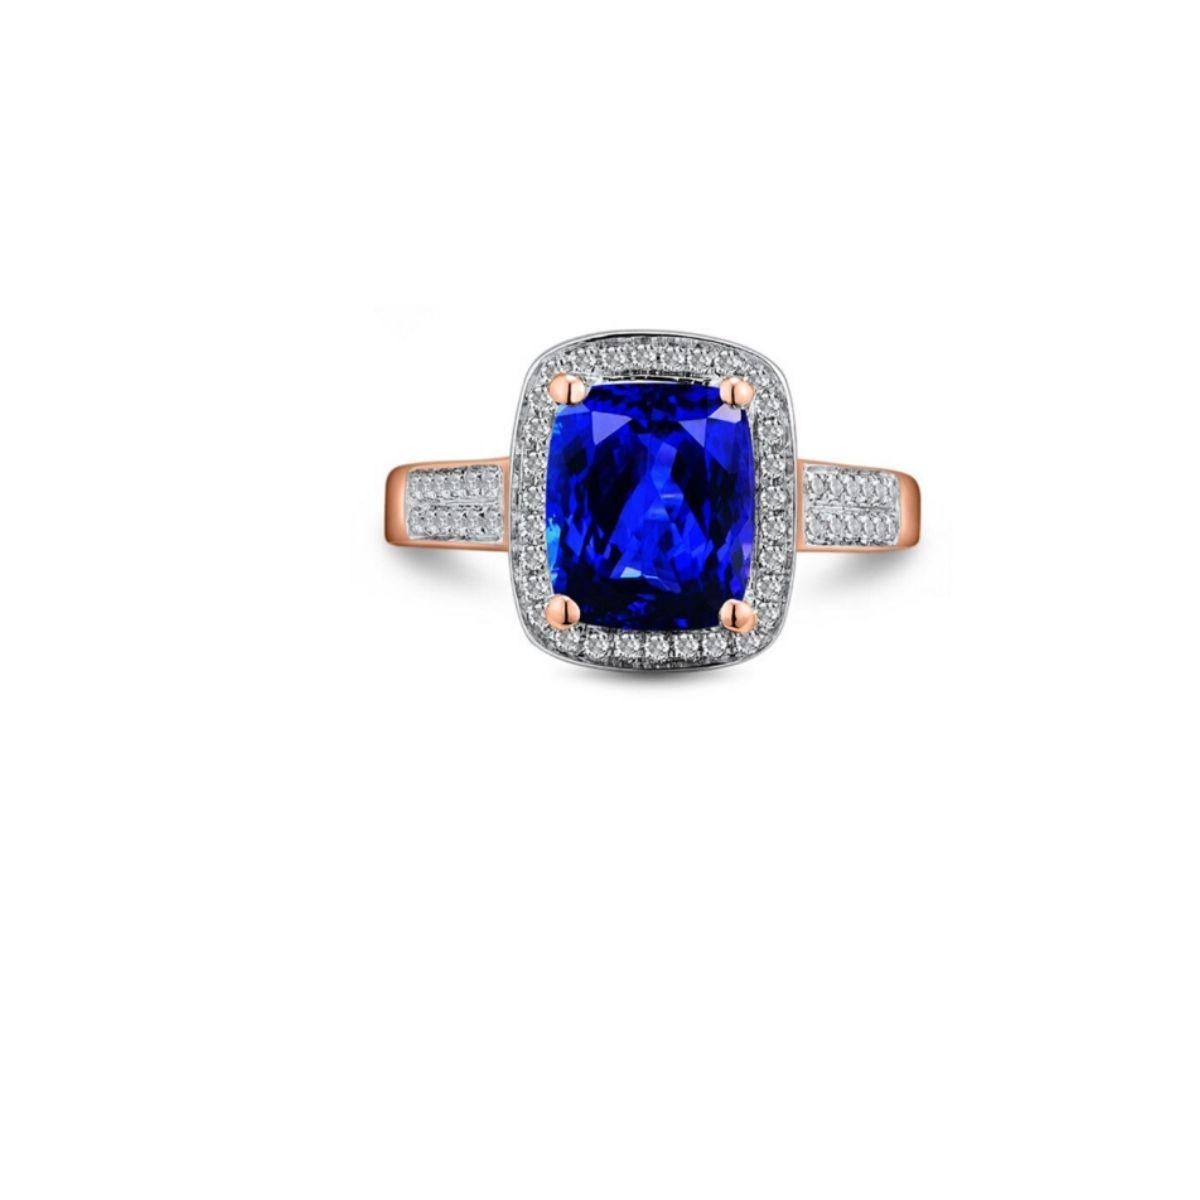 TANZANITE DIAMOND RING STANDS OUT WITH THIS 2.87CT STONE AND HAS  90 DIAMONDS SHOWING OFF ONES EACH SIDE OF THE RING MAKING THIS TRULY SPECTACULAR .   TIHS  CAN BE IN WHITE OR YELLOW GOLD 

Let us know your size when you purchase.


Diamonds: